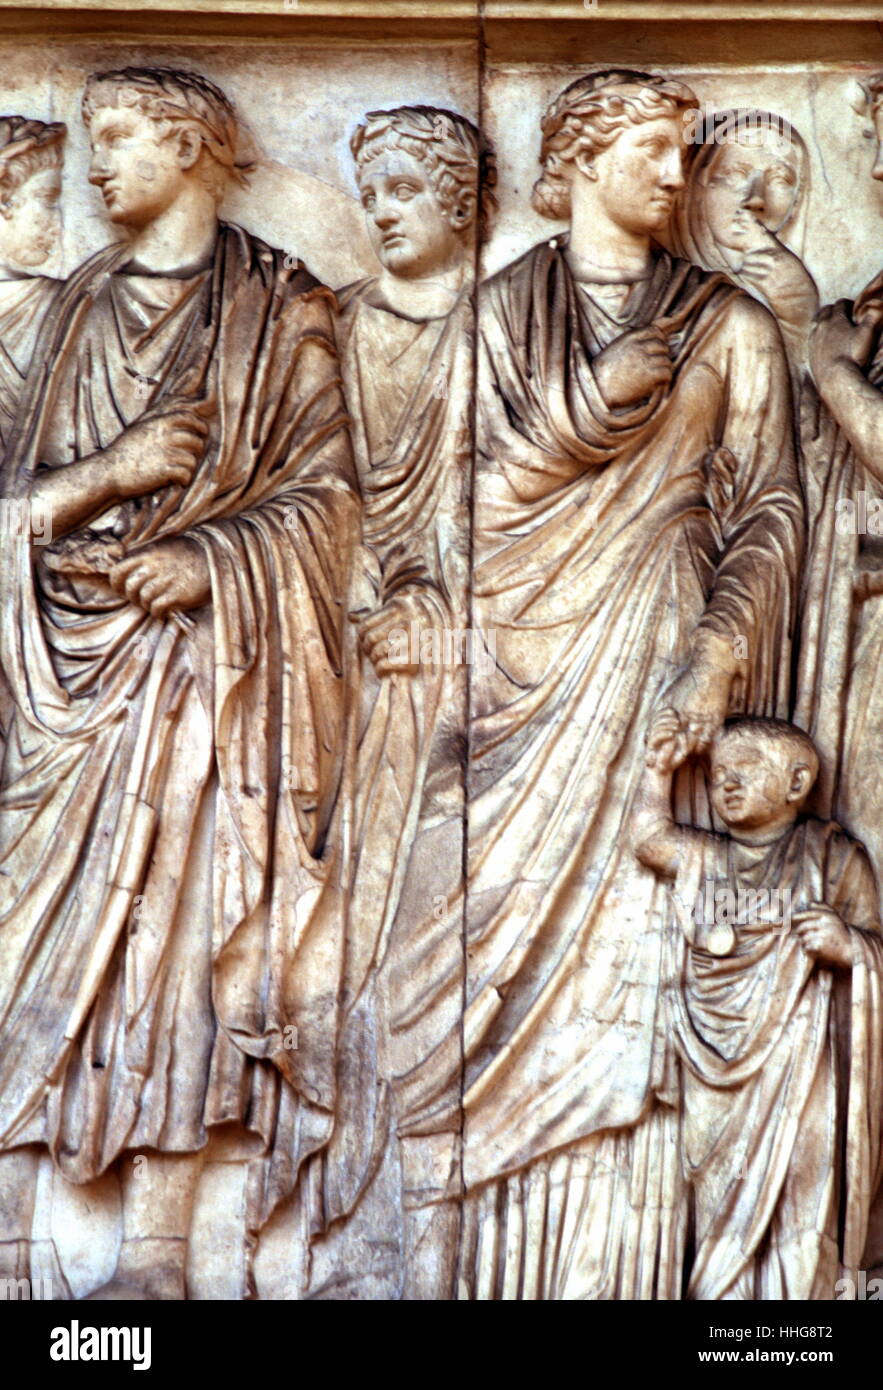 Germanicus (24 May 15 BC – 10 October AD 19) was a member of the Julio-Claudian dynasty and a prominent general of the early Roman Empire. Depicted on the Ara Pacis Augustae (Altar of Augustan Peace; commonly shortened to Ara Pacis) in Rome dedicated to Pax, the Roman goddess of Peace. The monument was commissioned by the Roman Senate on July 4, 13 BC to honour the return of Augustus to Rome after three years in Hispania and Gaul, Stock Photo